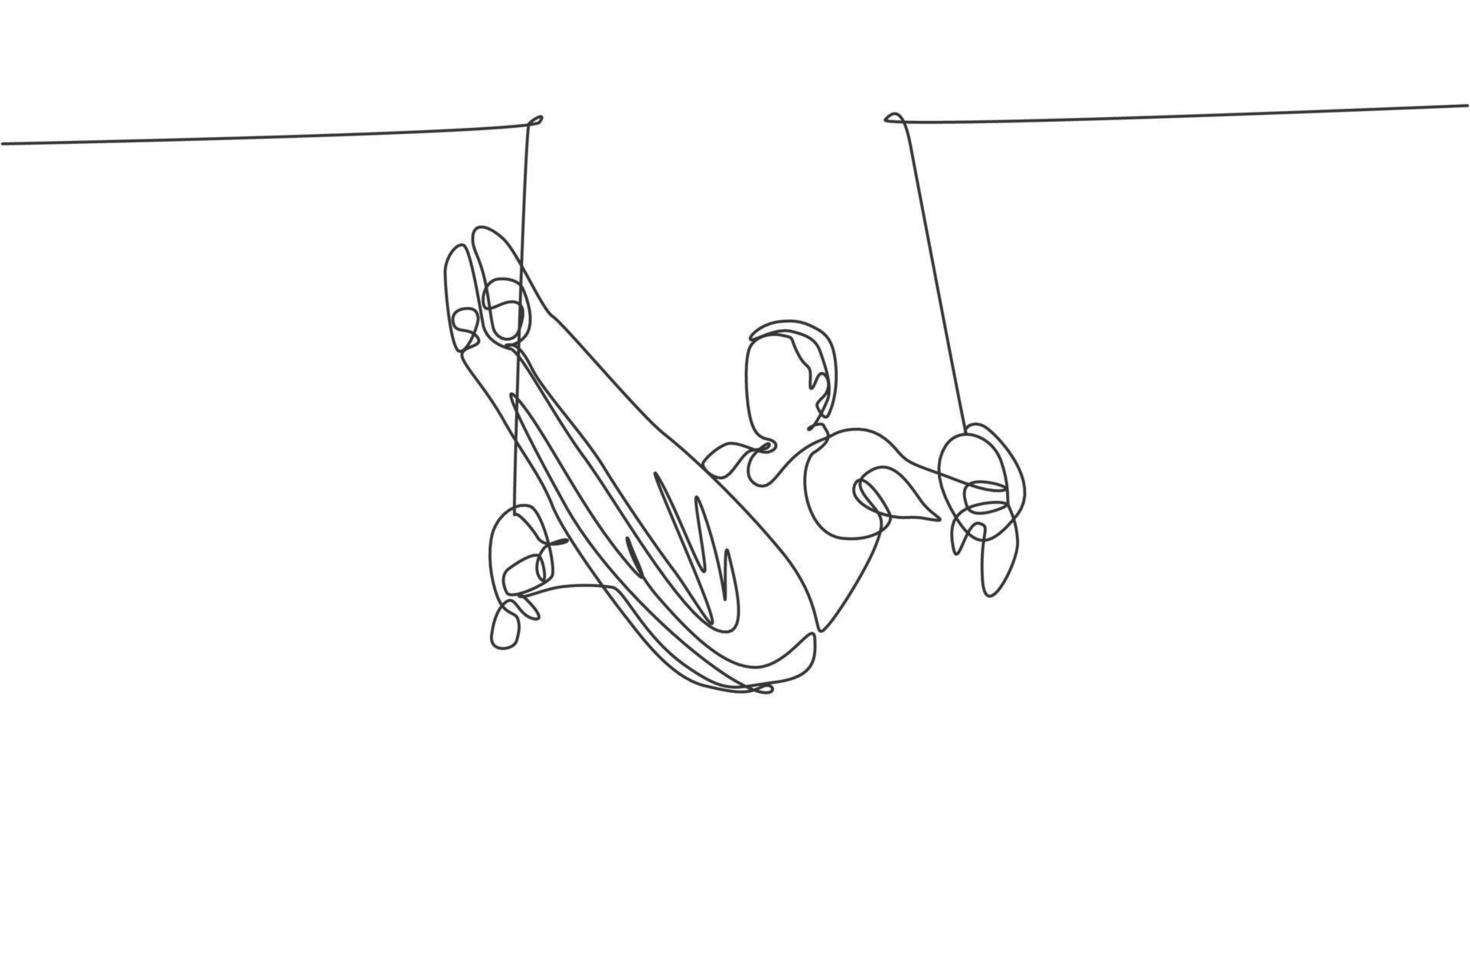 Single continuous line drawing young handsome professional gymnast man perform acrobatic motion. Steady rings training and stretching concept. Trendy one line draw design vector illustration graphic